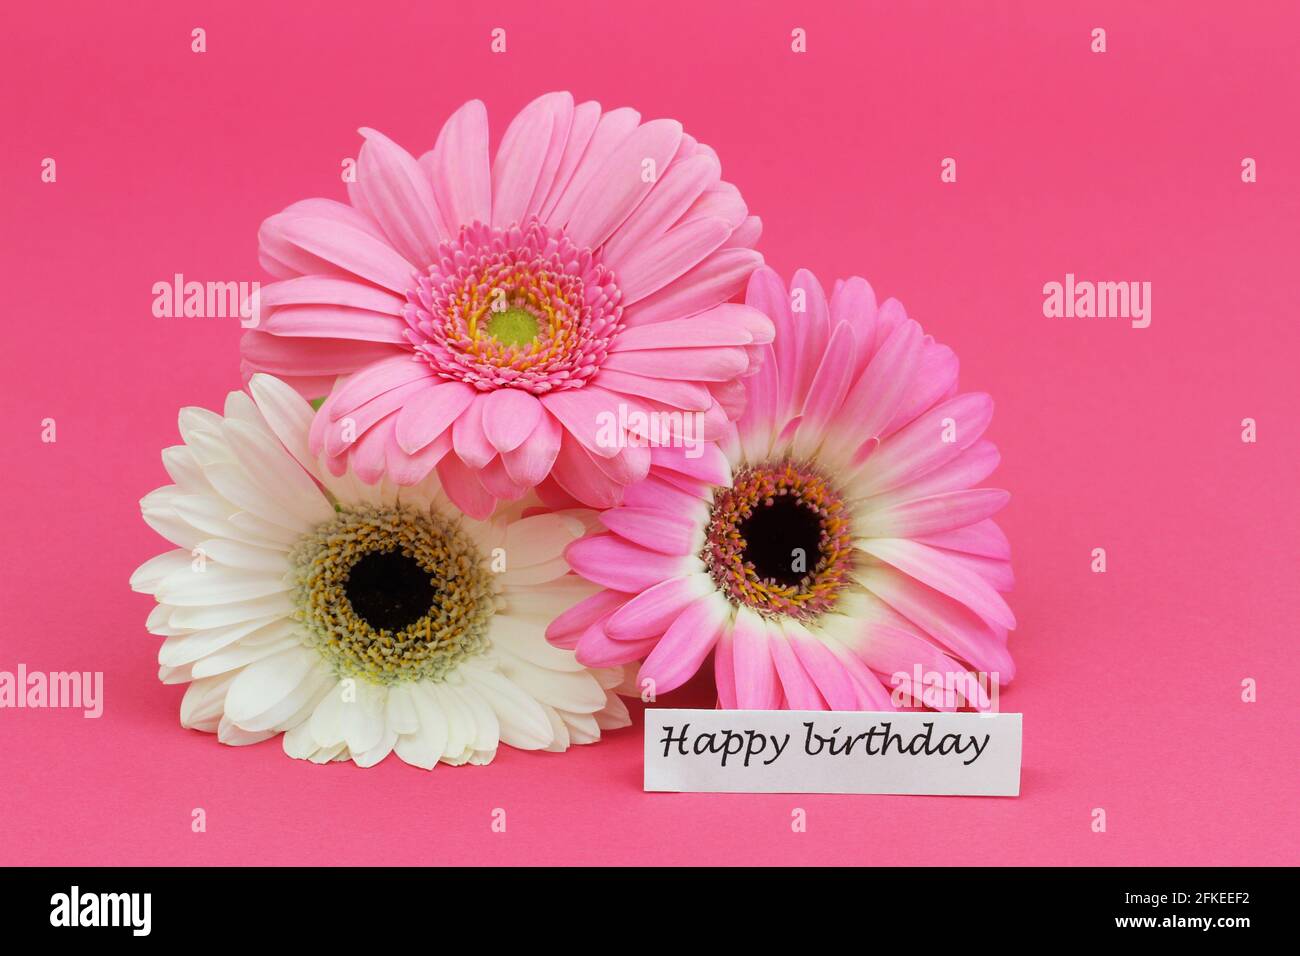 Happy birthday card with pink and white gerbera daisies on pink background Stock Photo